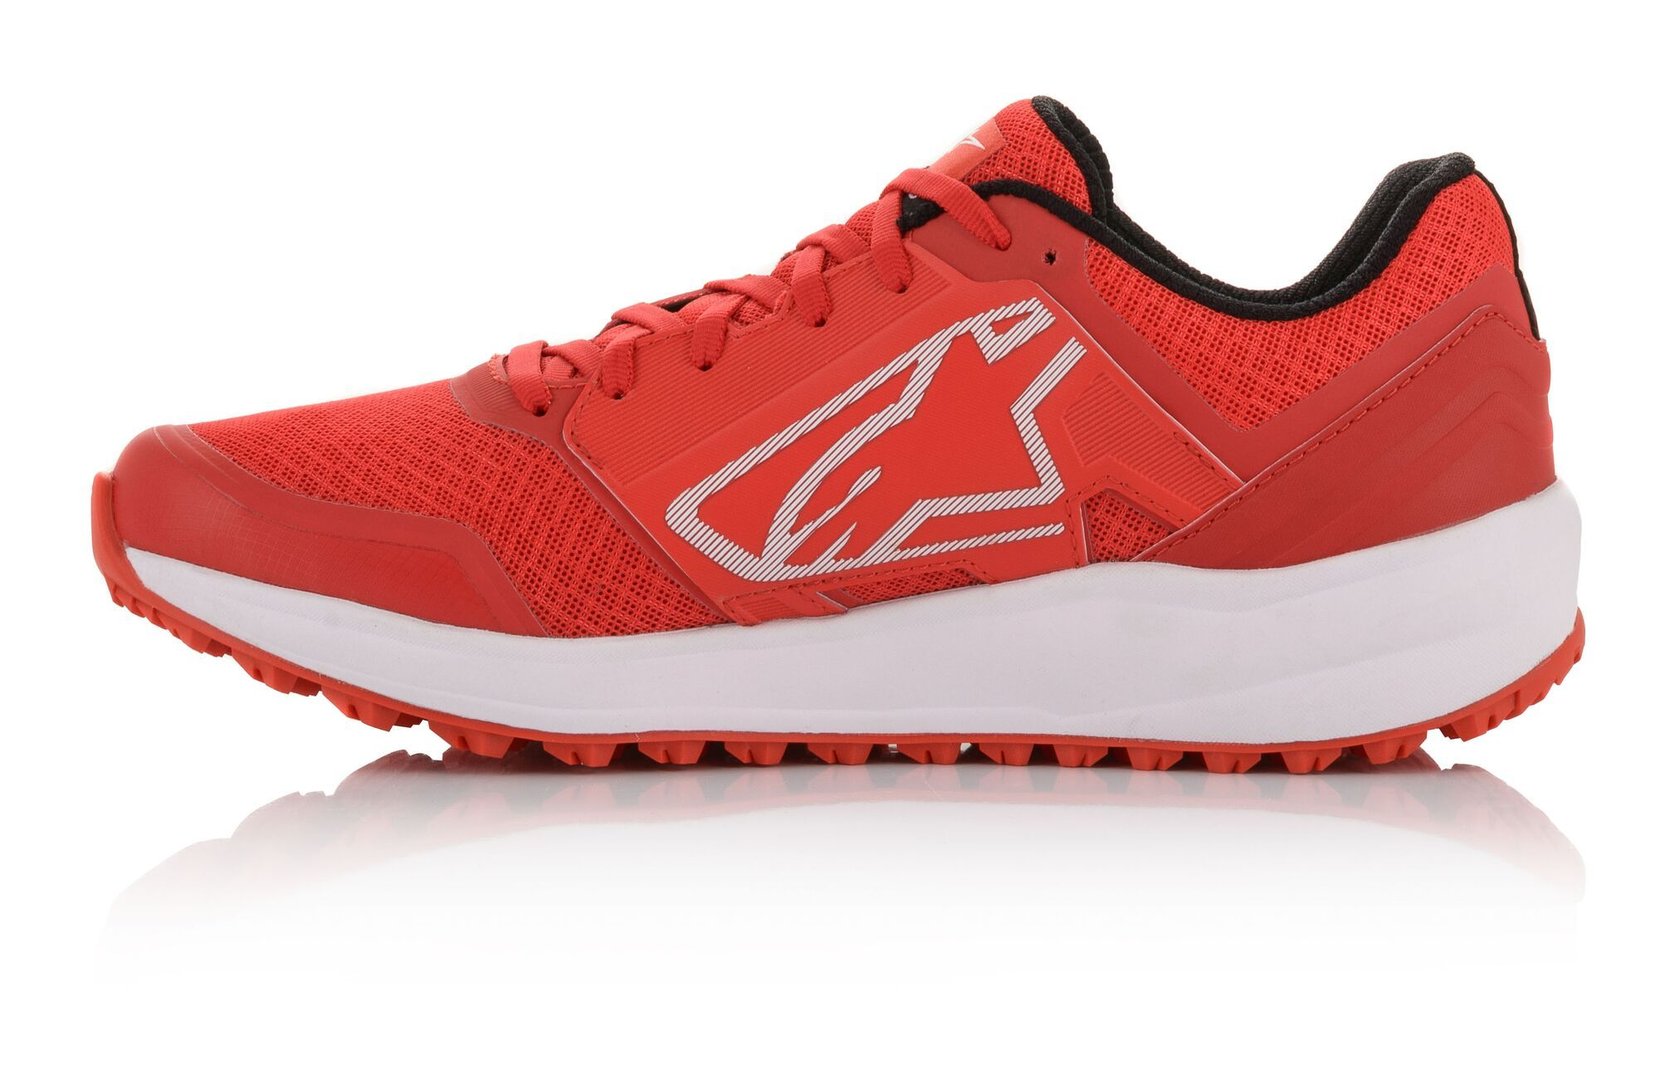 ALPINESTARS 2654820_32_14 META TRAIL RUNNING shoes, red/white, size 48 (14) (Фото-3)